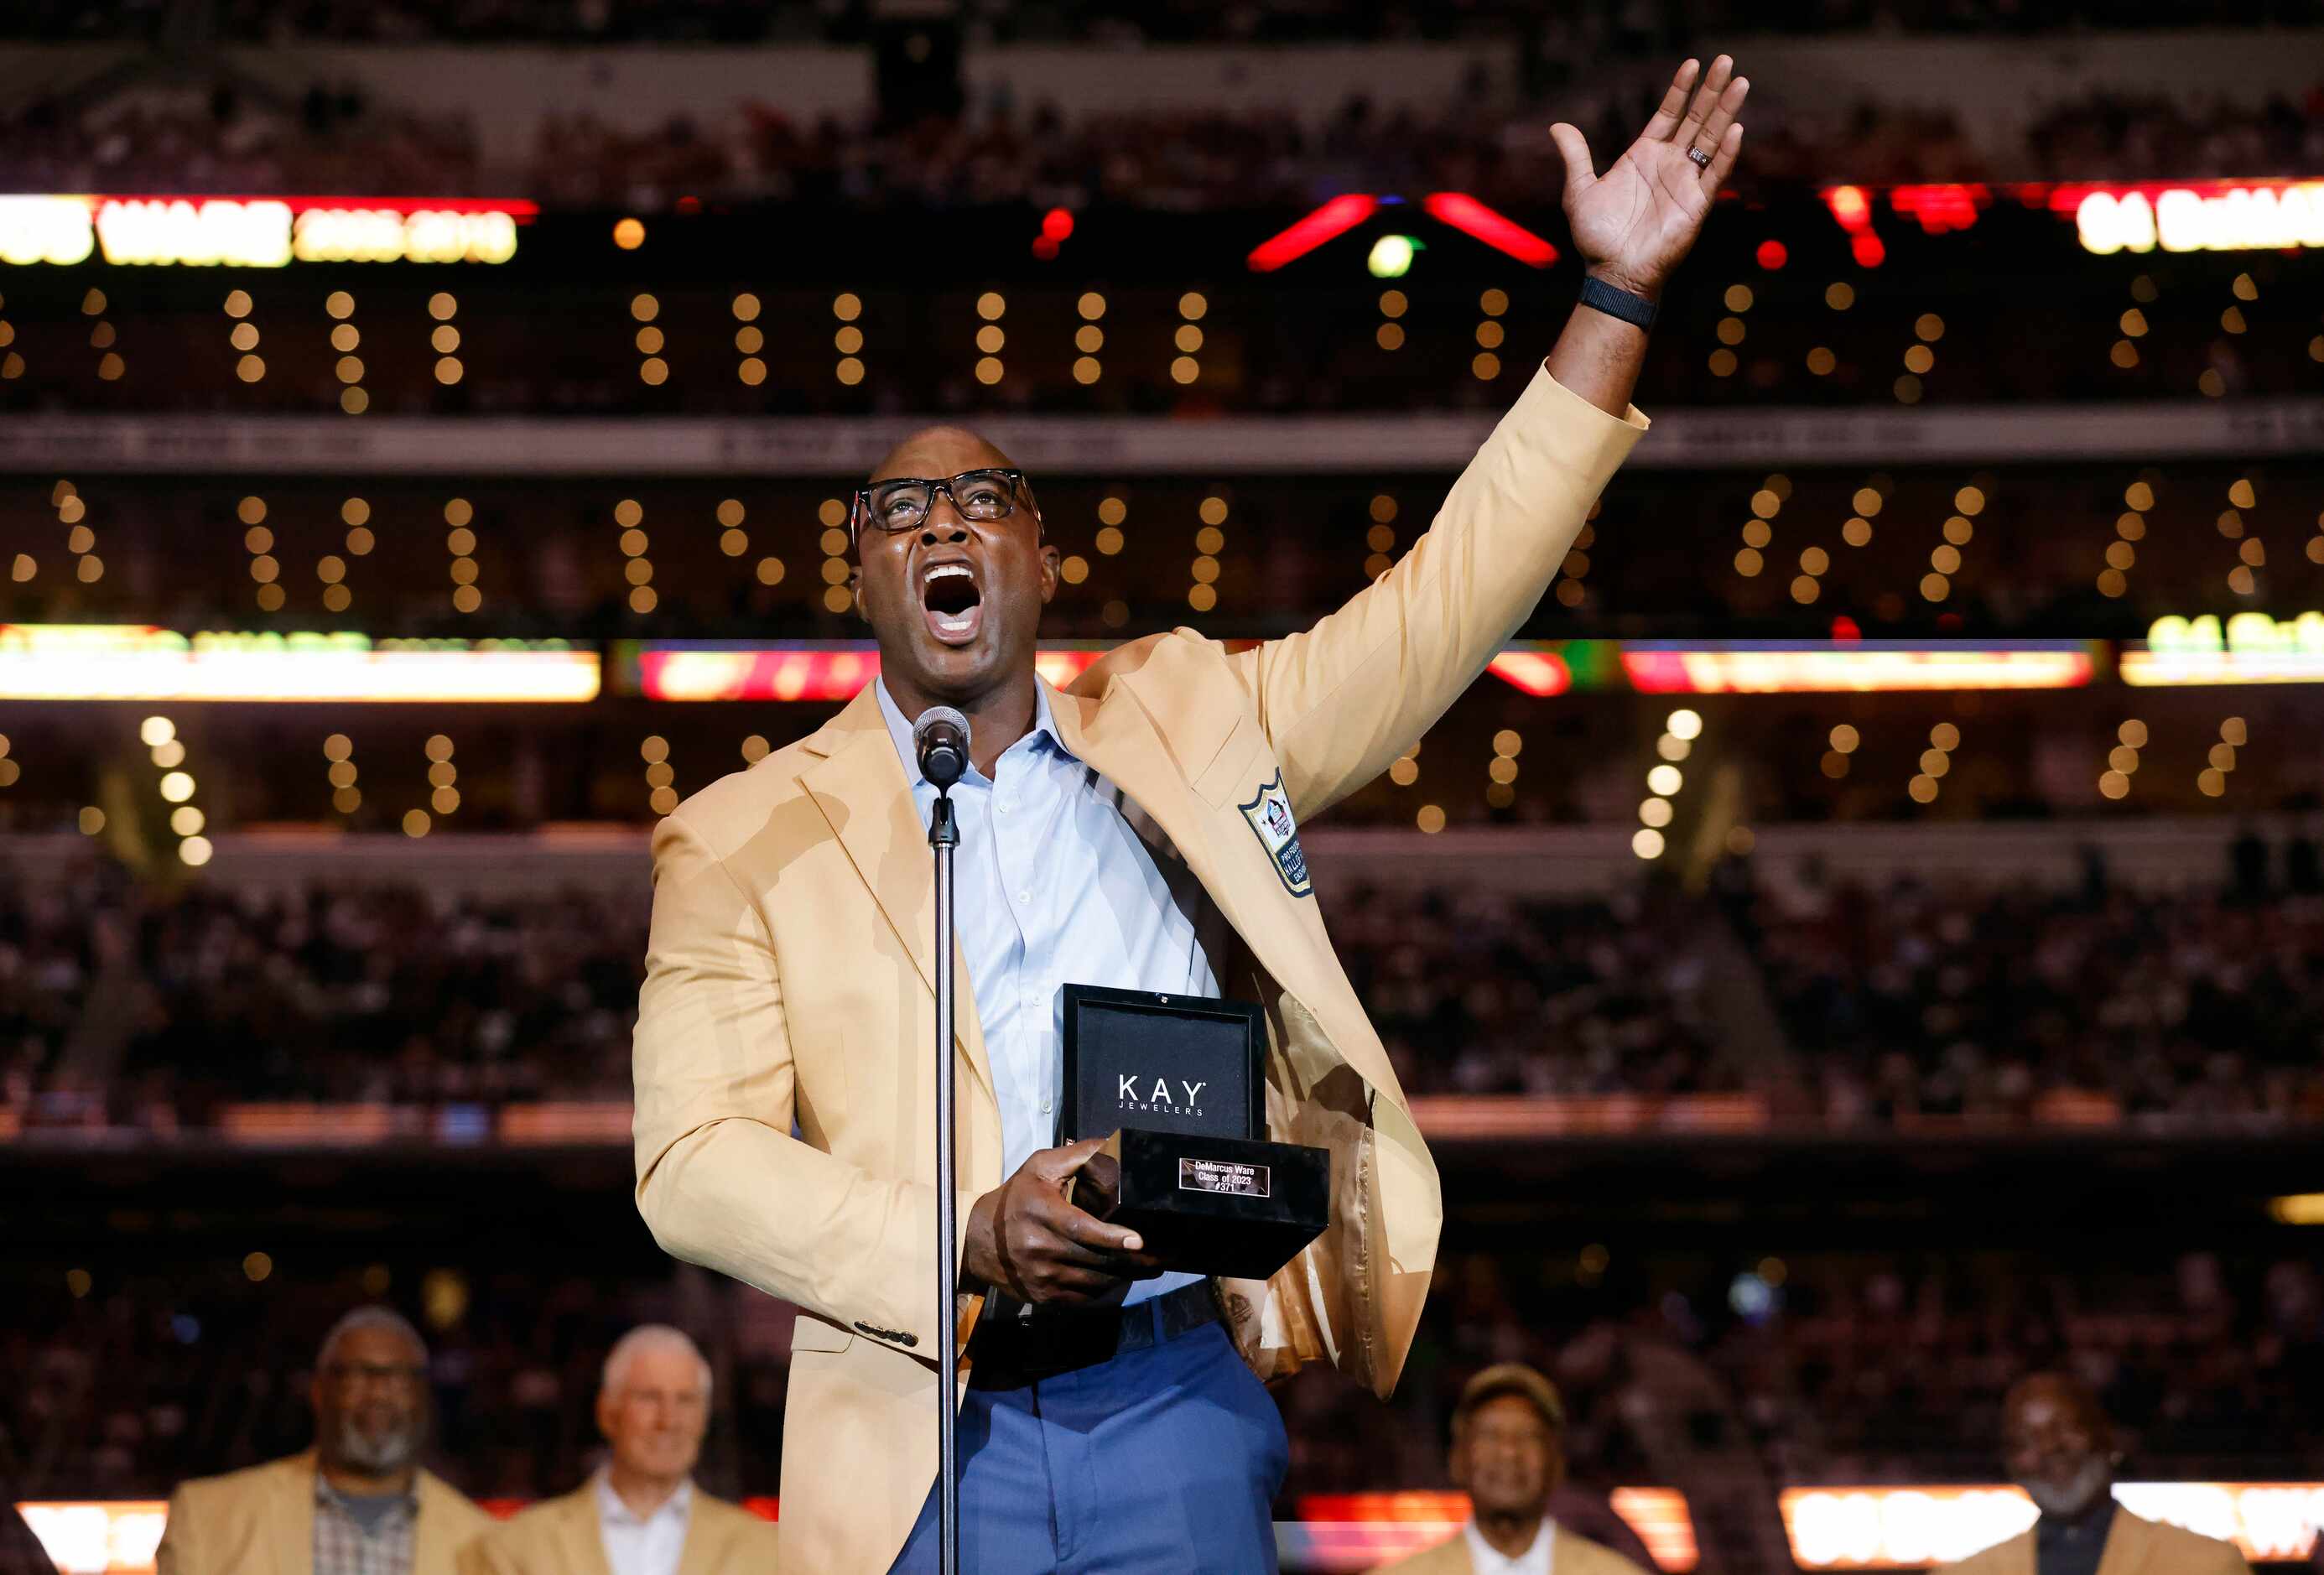 Dallas Cowboys Pro Football Hall of Famer DeMarcus Ware speaks to the crowd after e...